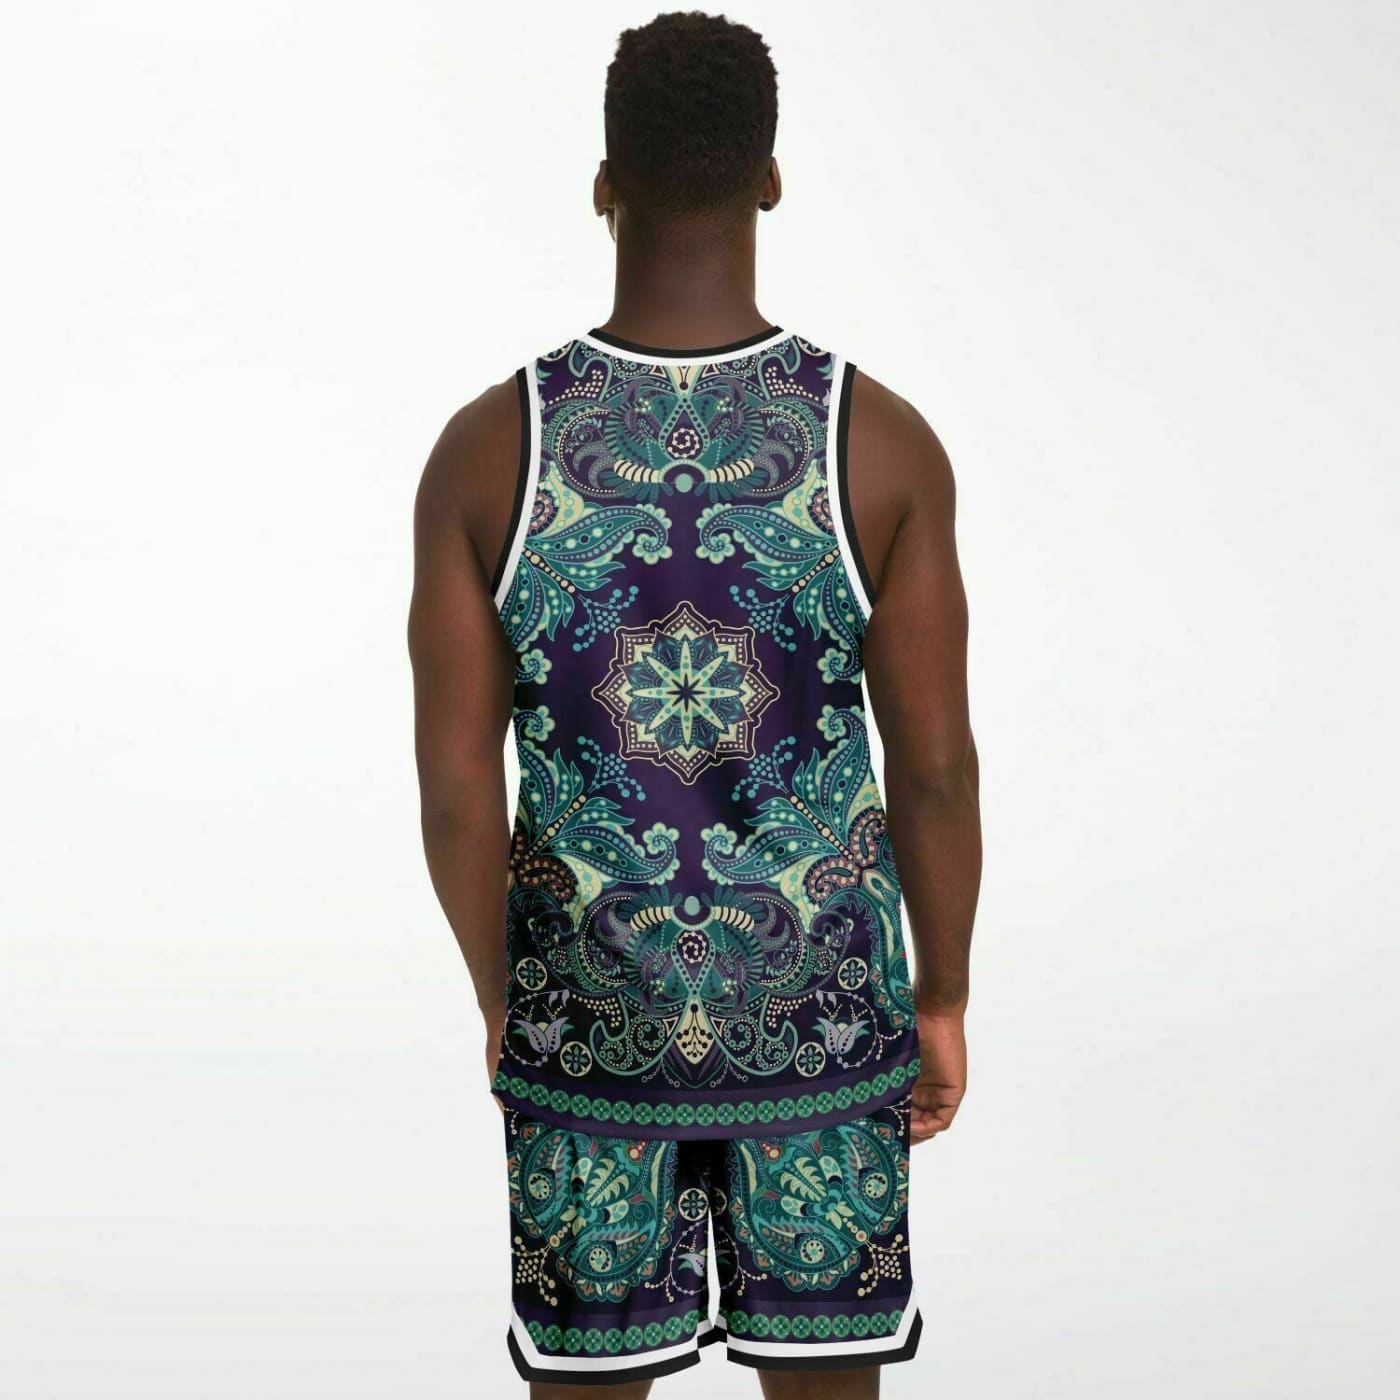 Forest Bloom Basketball Jersey and Shorts Set - Basketball 